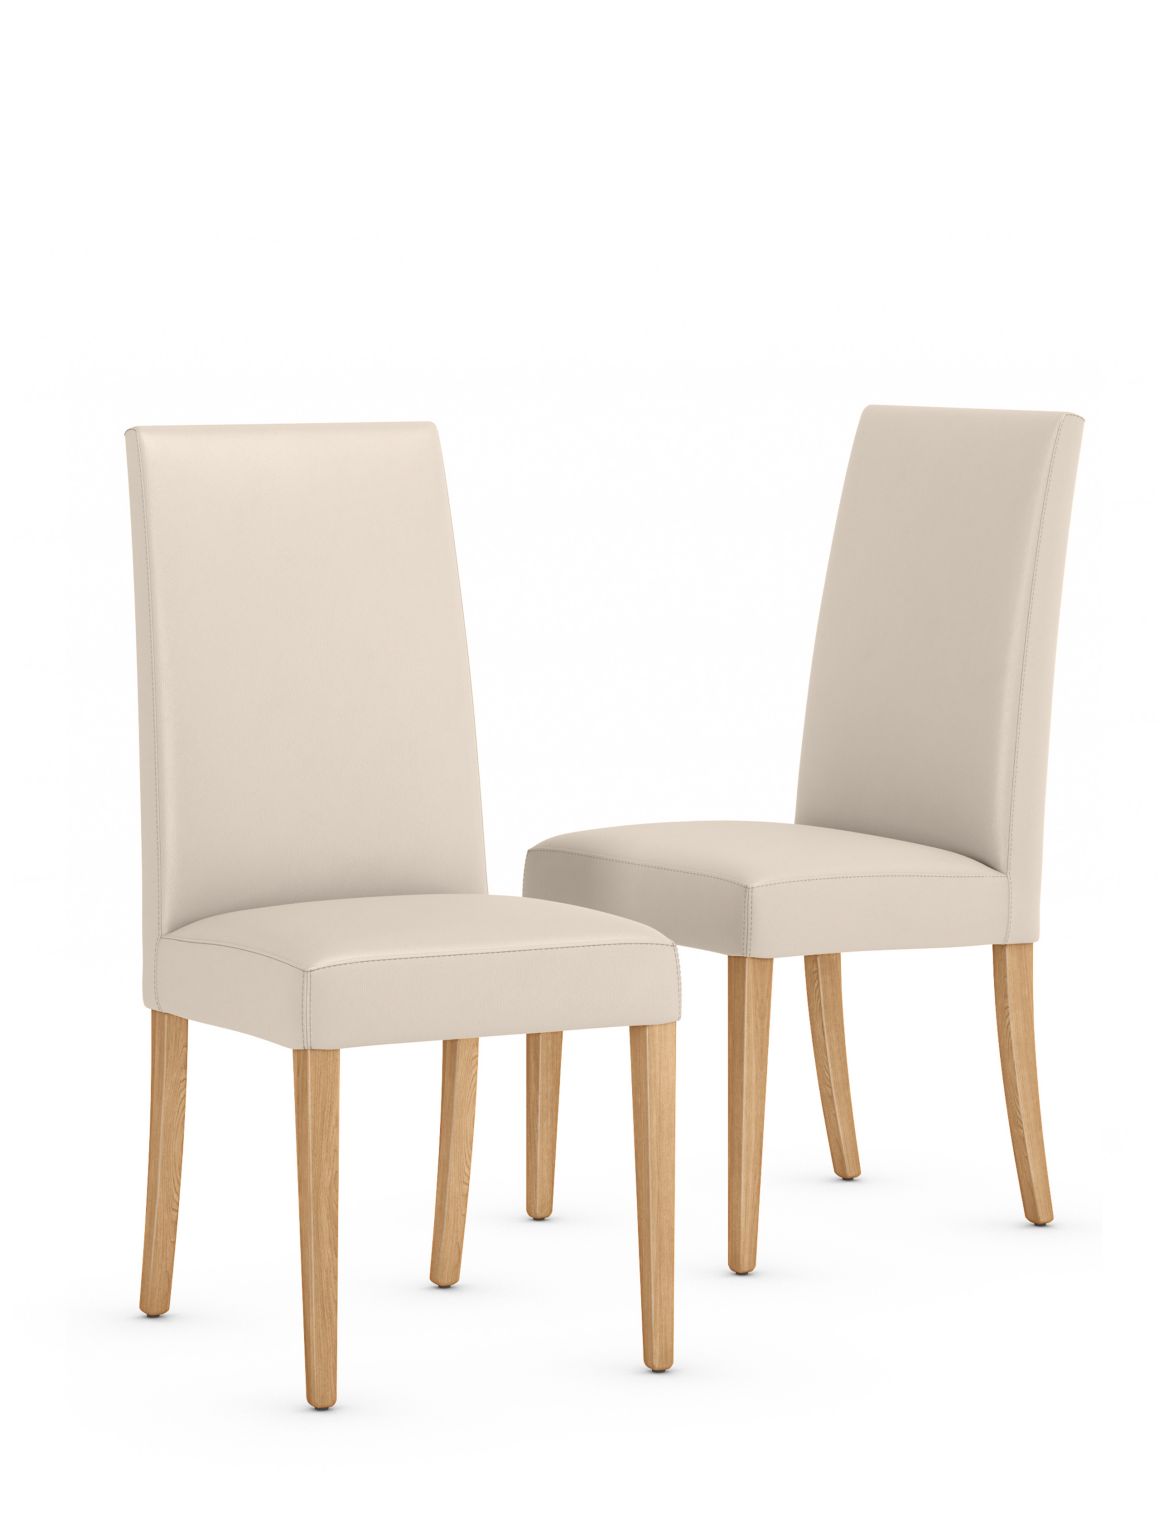 Set of 2 Alton Faux Leather Dining Chairs white